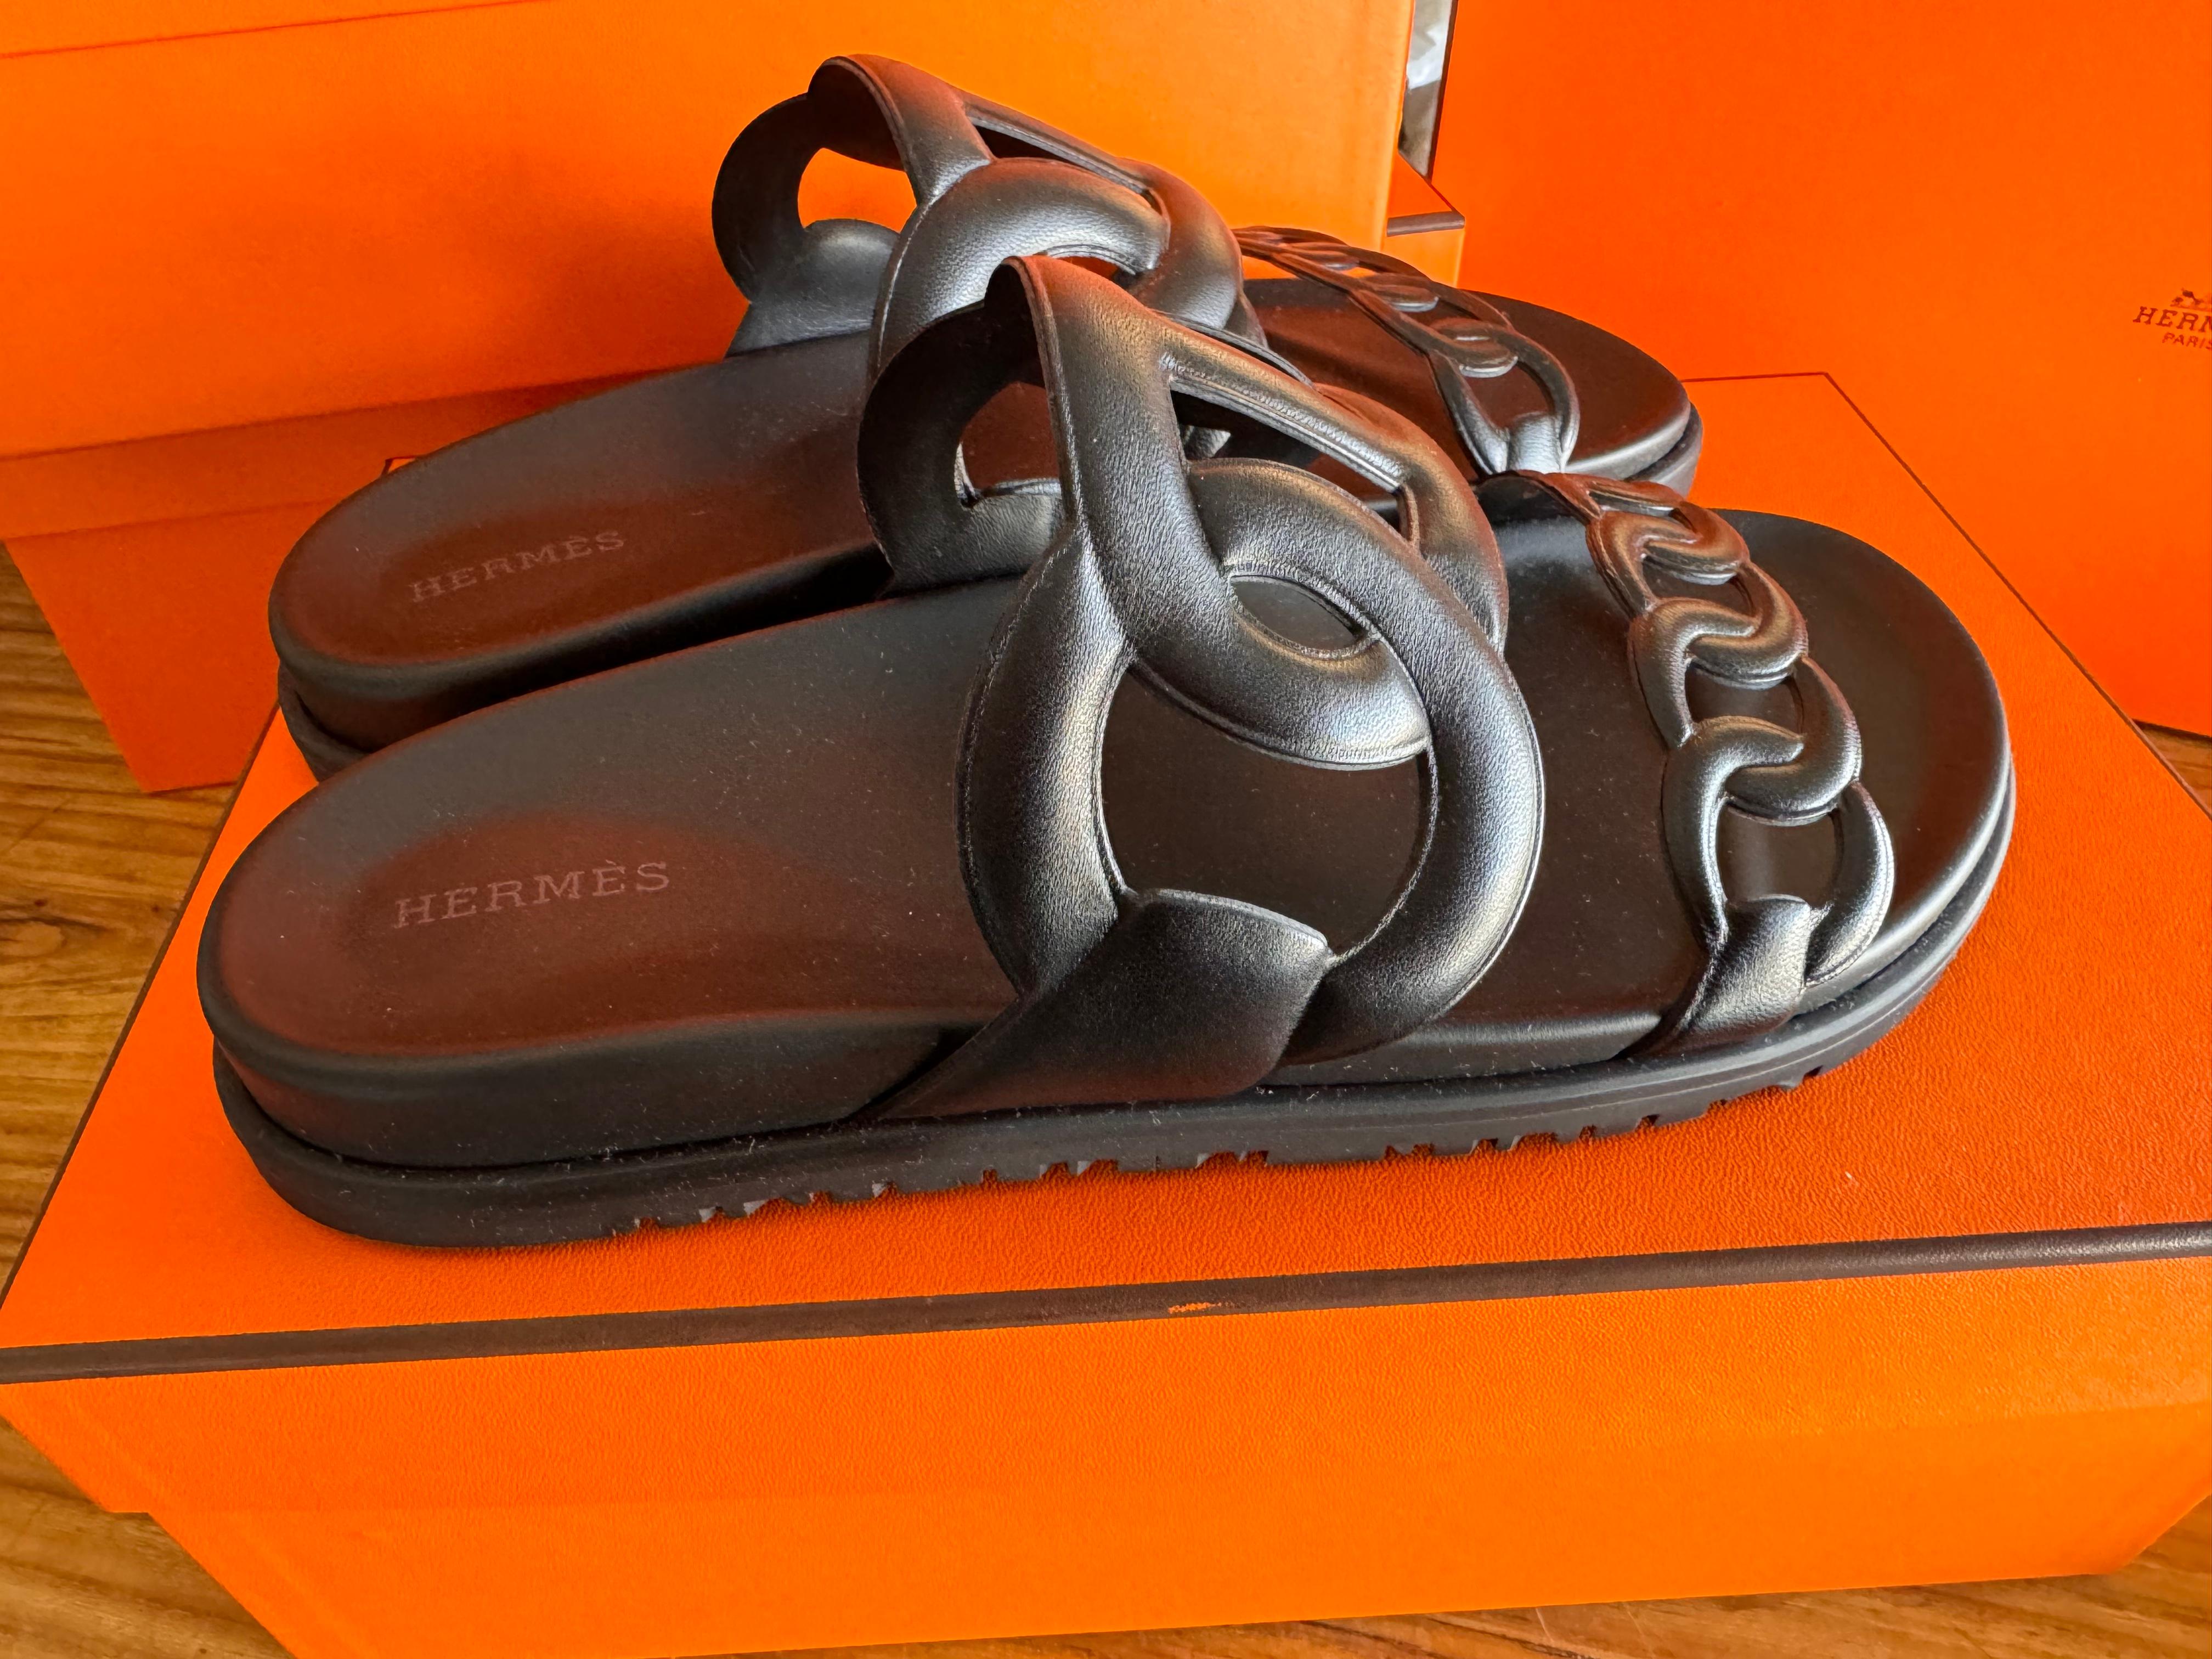 Elevate your footwear collection with the impeccable craftsmanship and timeless style of Hermes’ black kappa sandals Extra, now available in size 39 and presented in their original box complete with a dust bag for storage. Designed to effortlessly